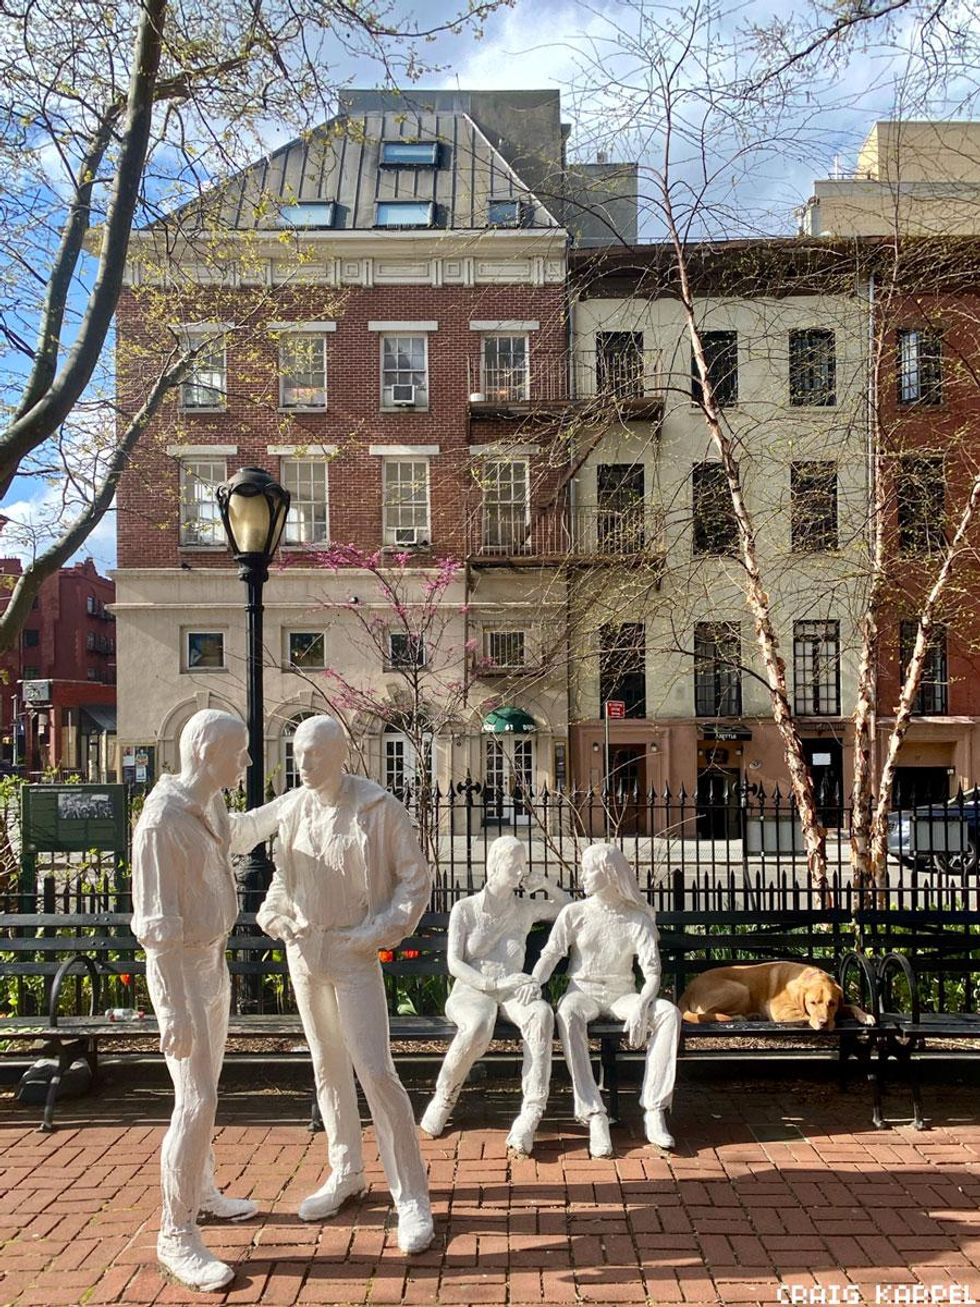 Mingling with statues at the Stonewall National Monument.